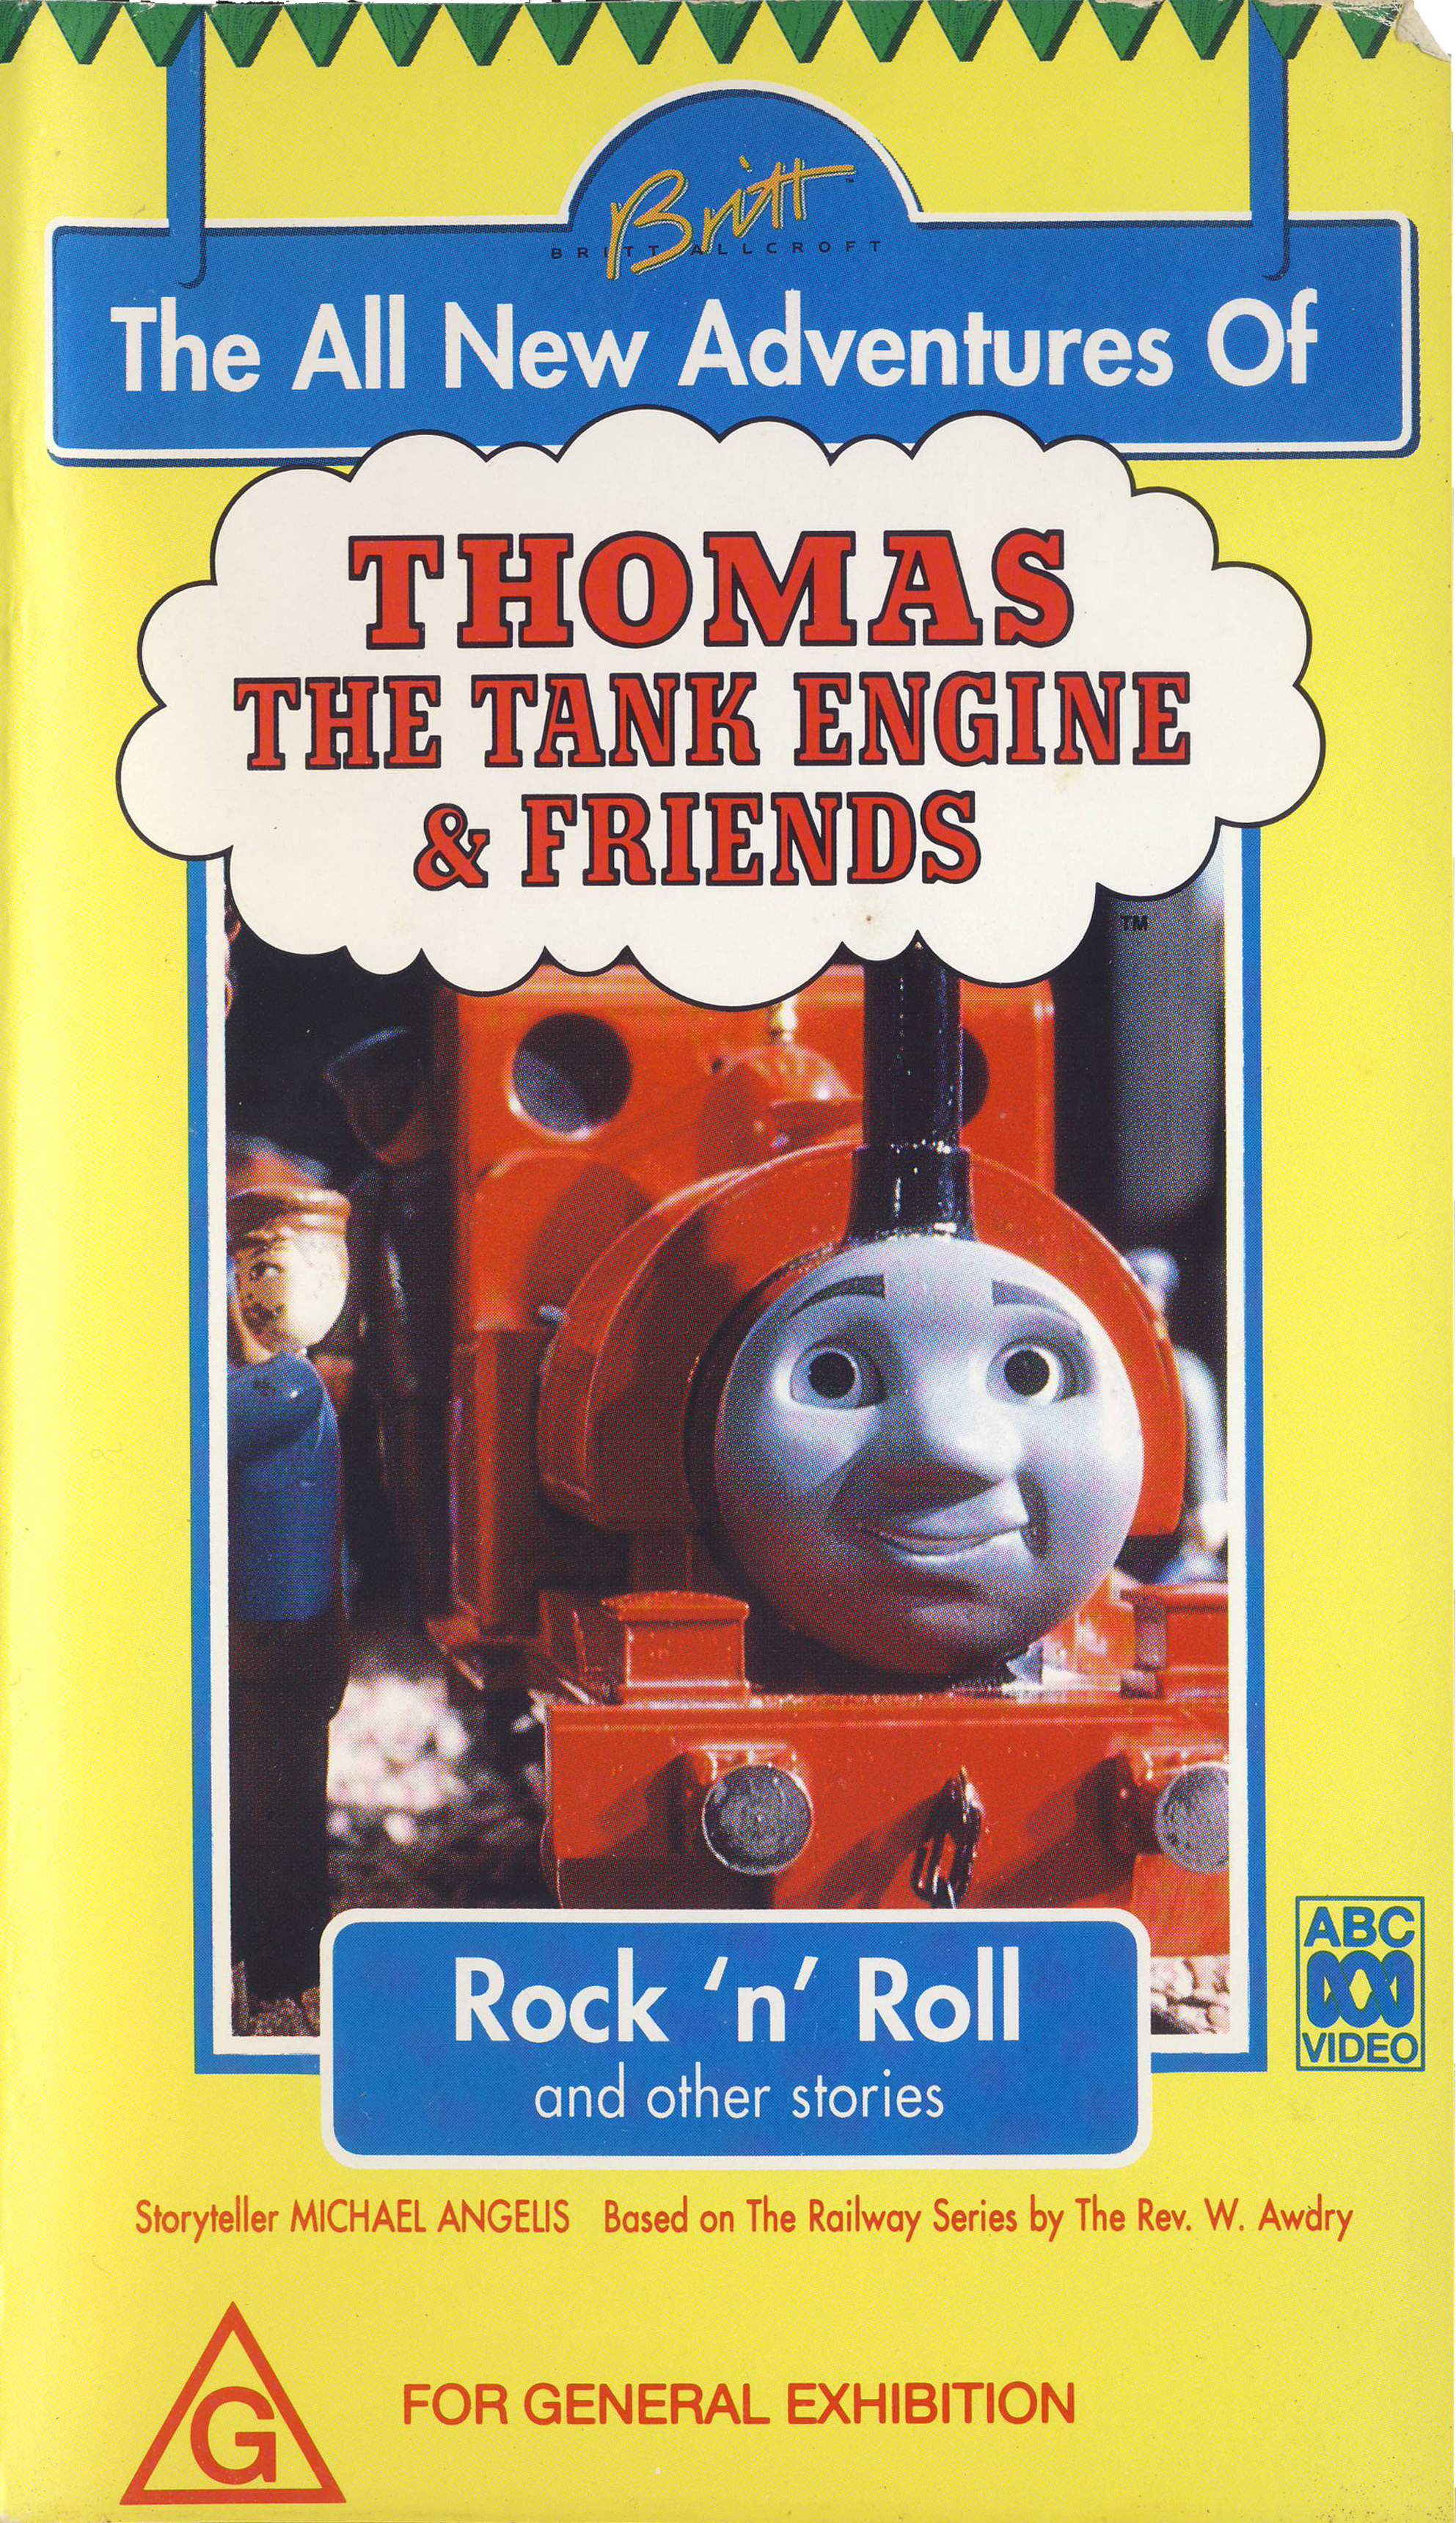 Rock 'n' Roll and Other Stories | Thomas the Tank Engine Wikia